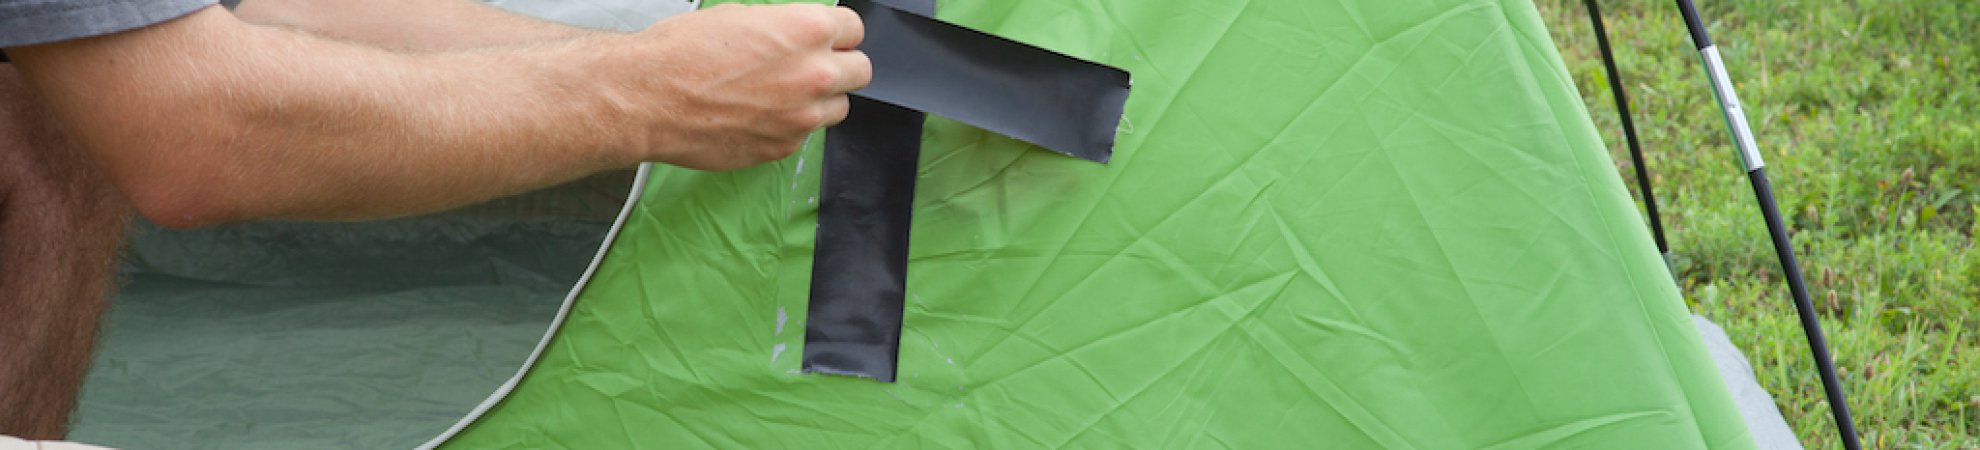 gaffer tape uses outdoors